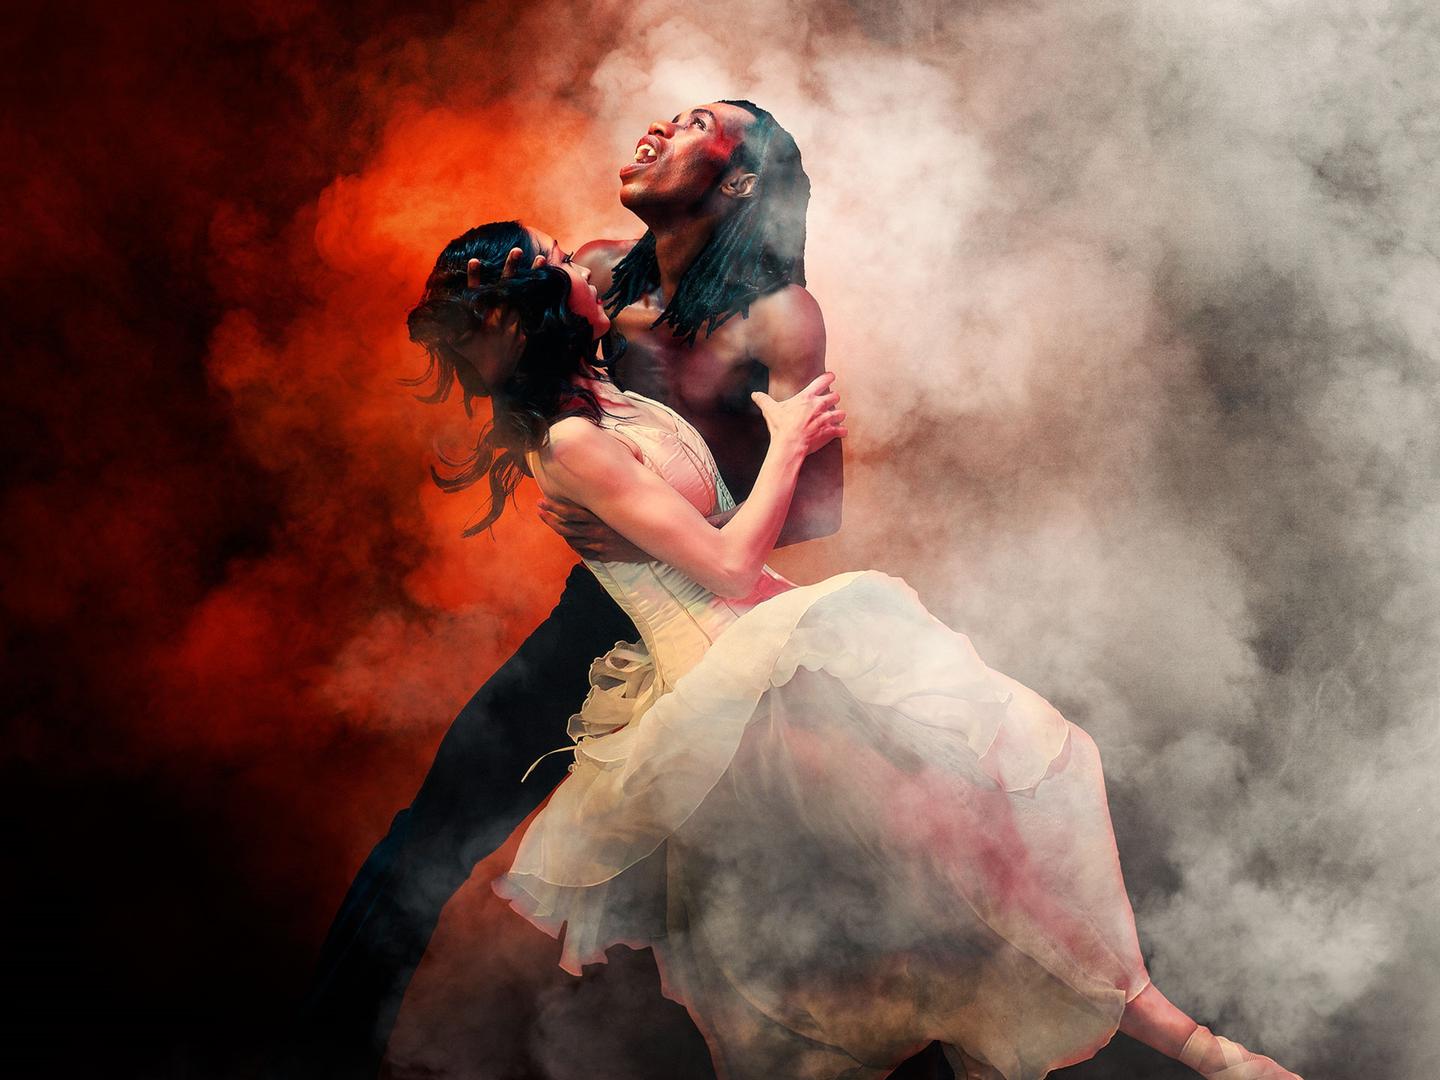 The dark tale of the immortal Count - played out through Northern Ballets sensuous dancing and gripping theatre - is not to be missed. Running at Leeds Playhouse from Tuesday October 29 to Saturday November 2.